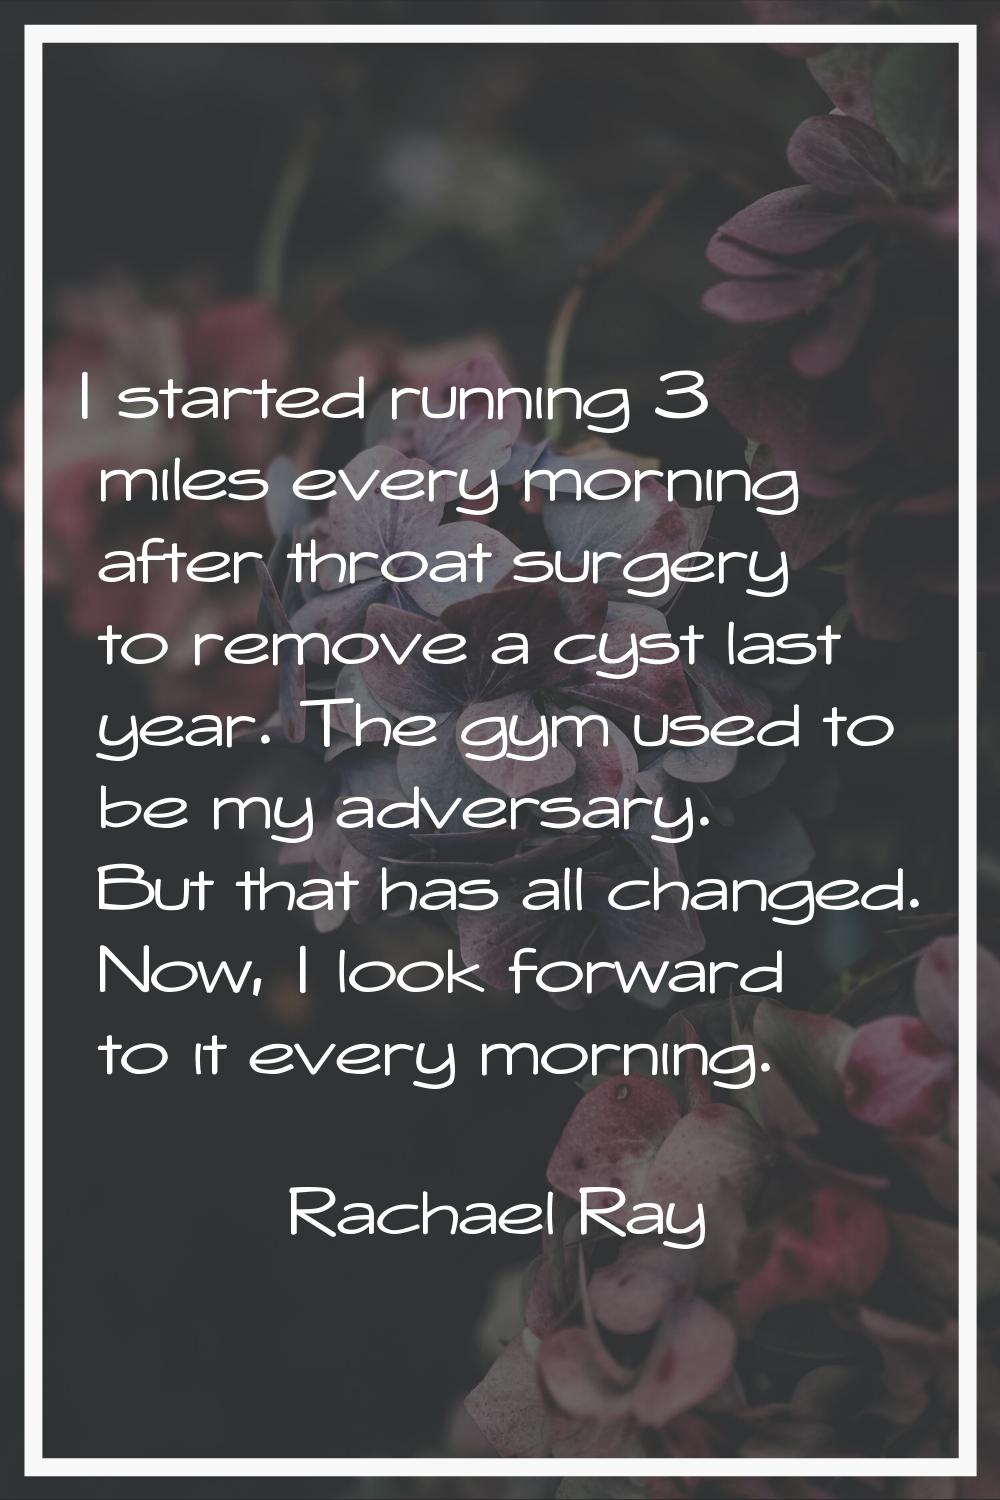 I started running 3 miles every morning after throat surgery to remove a cyst last year. The gym us